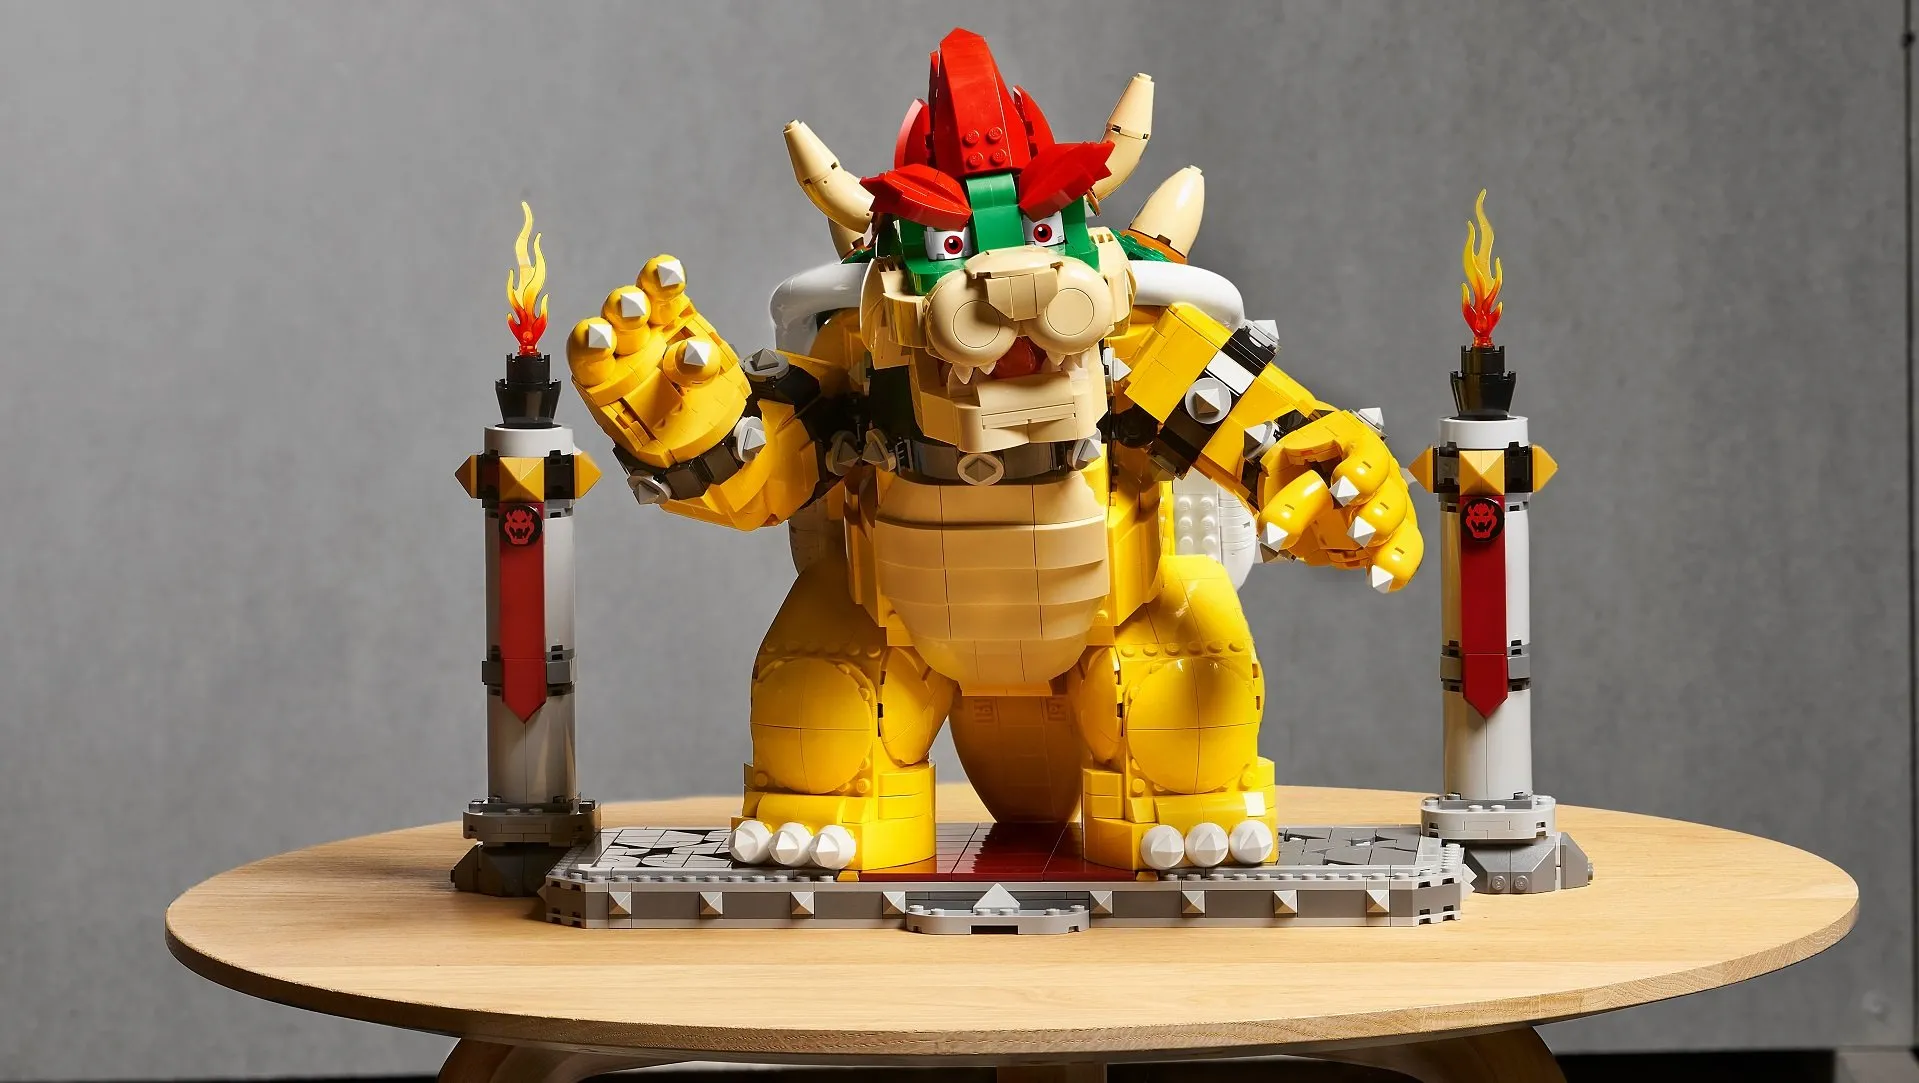 LEGO Super Mario The Mighty Bowser